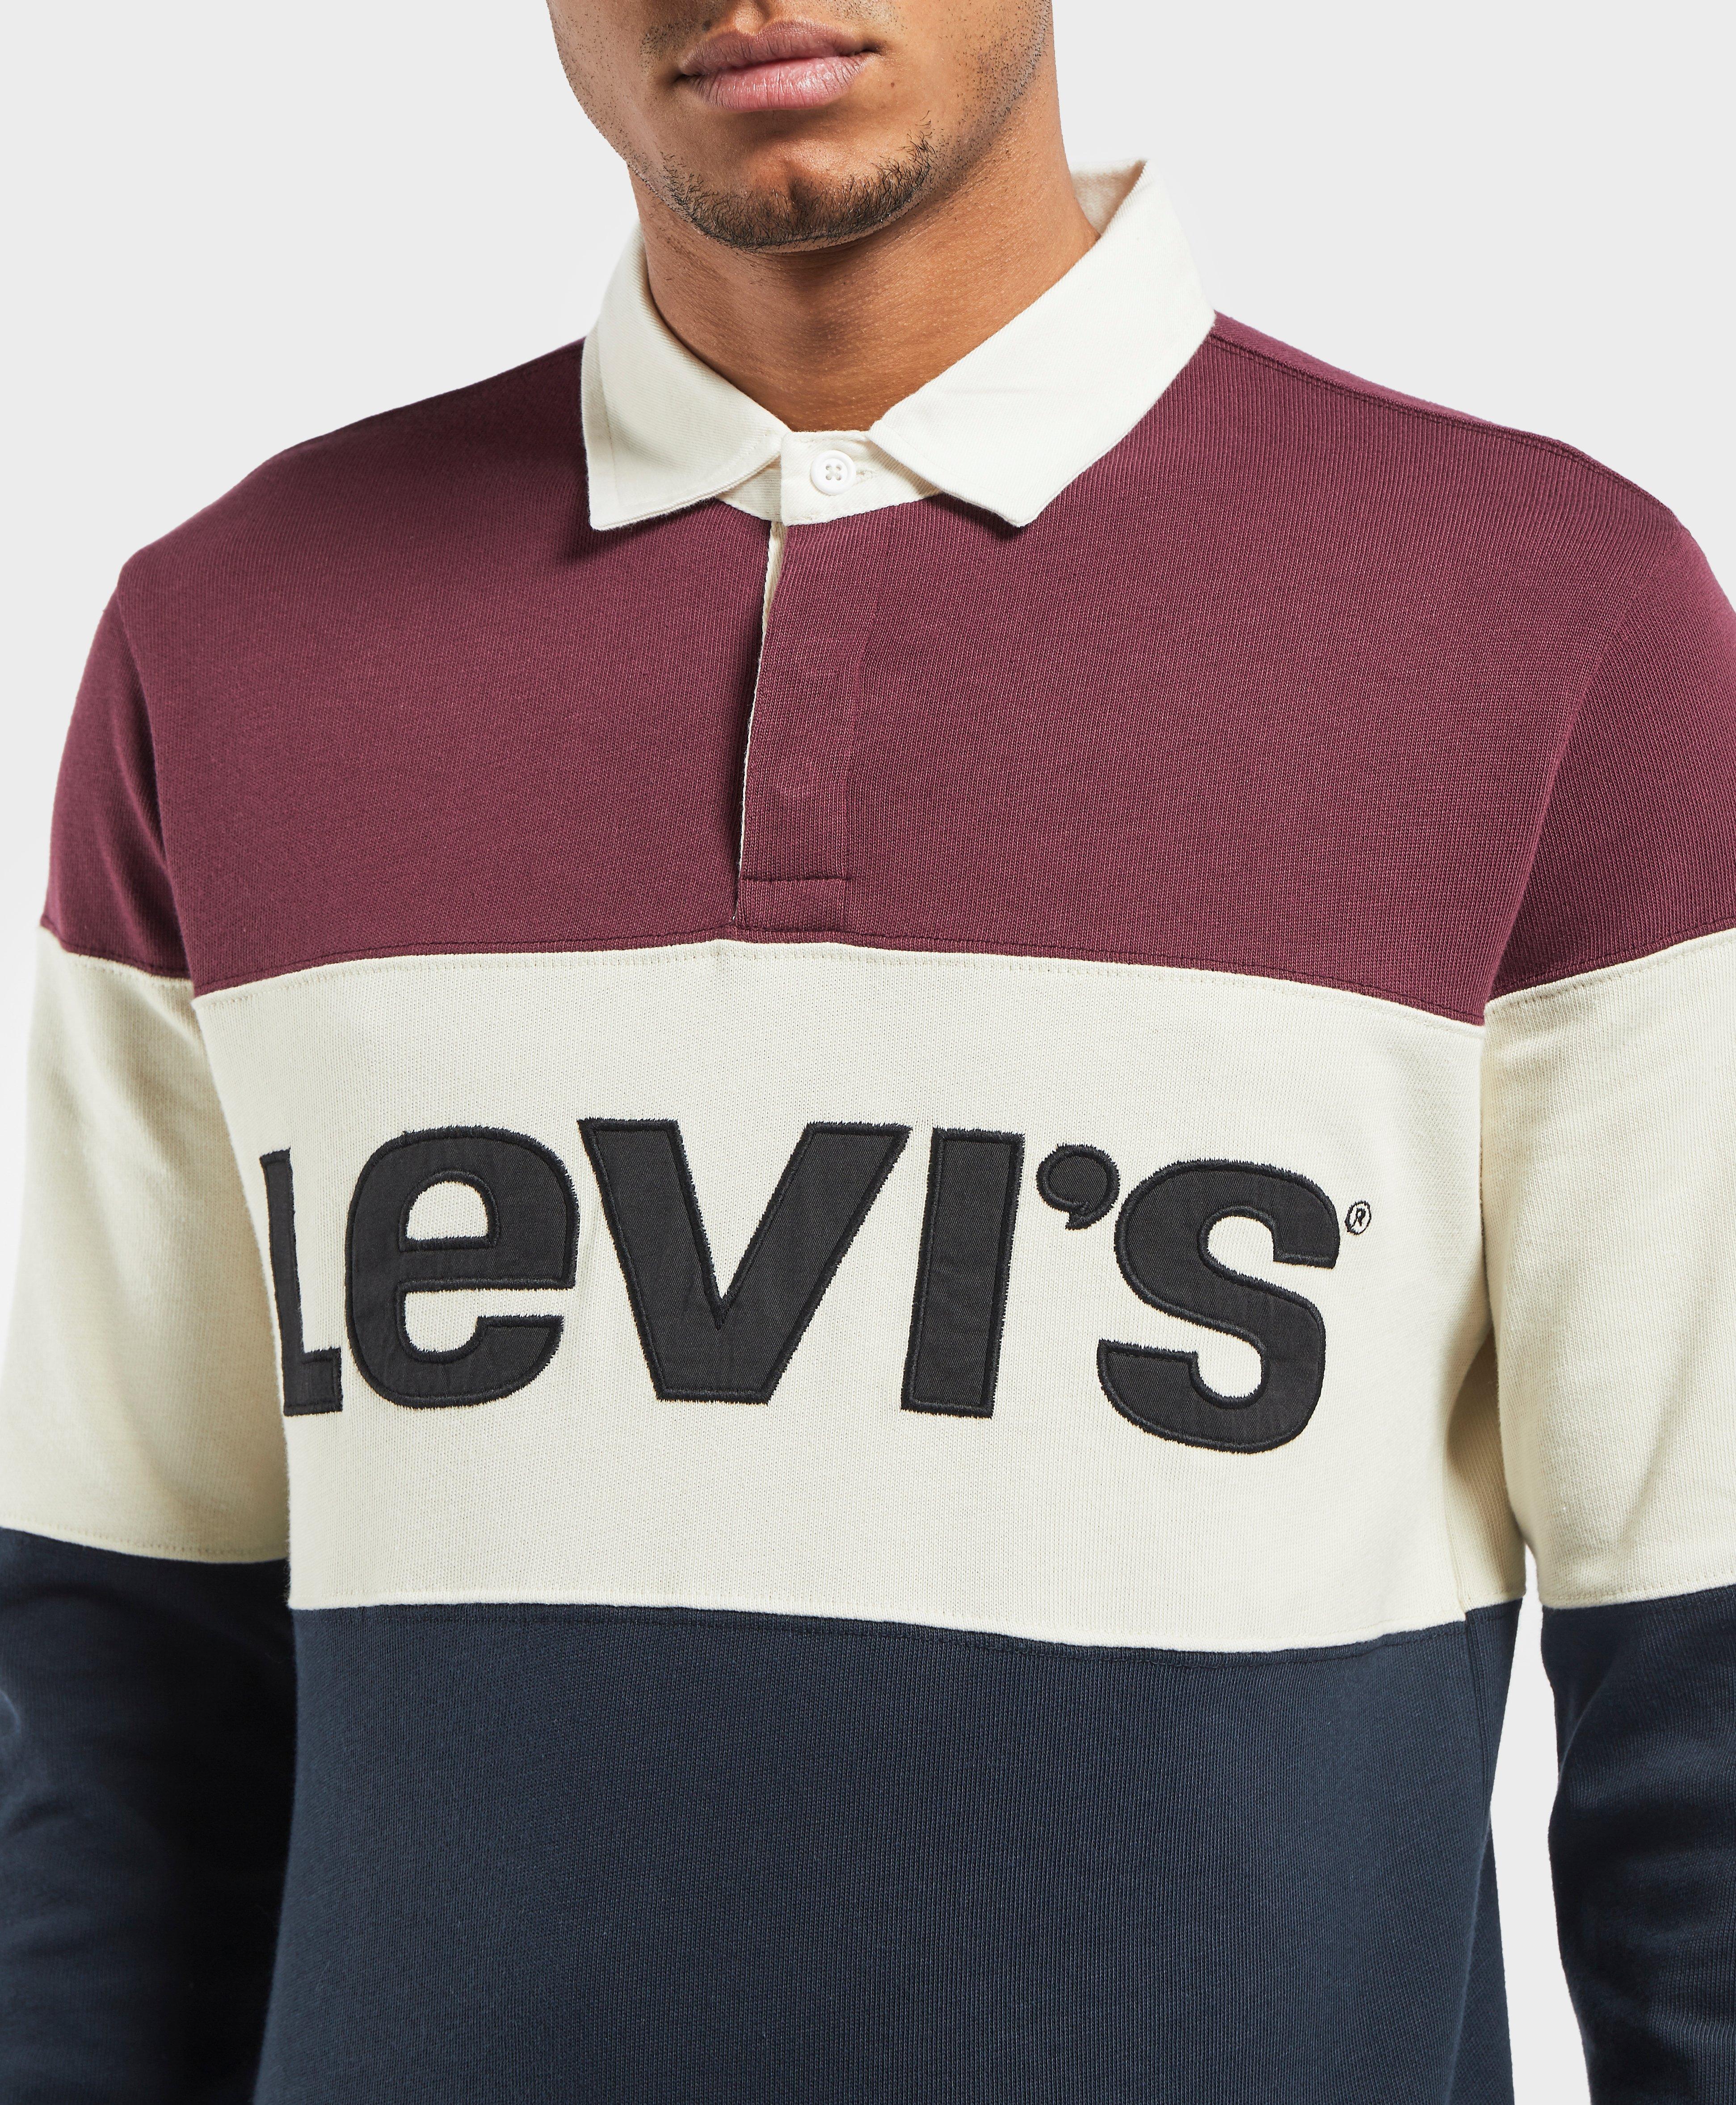 levi's rugby shirt